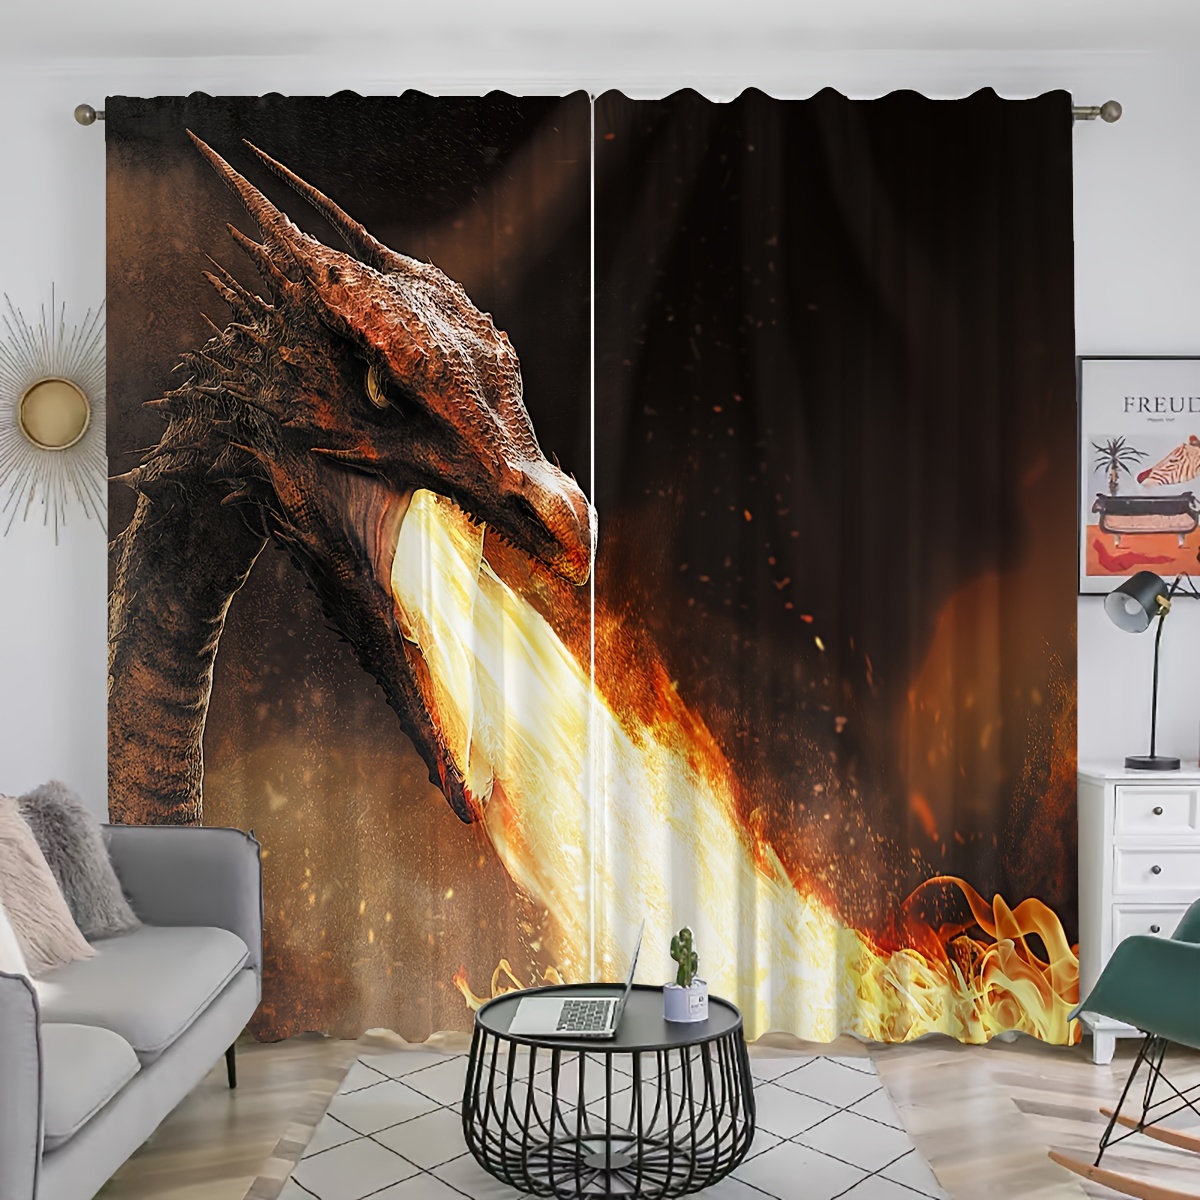 

2pcs Dragon Printed Curtains, Rod Pocket Curtain, Suitable For Restaurants, Public Places, Living Rooms, Bedrooms, Offices, Study Rooms, Home Decoration